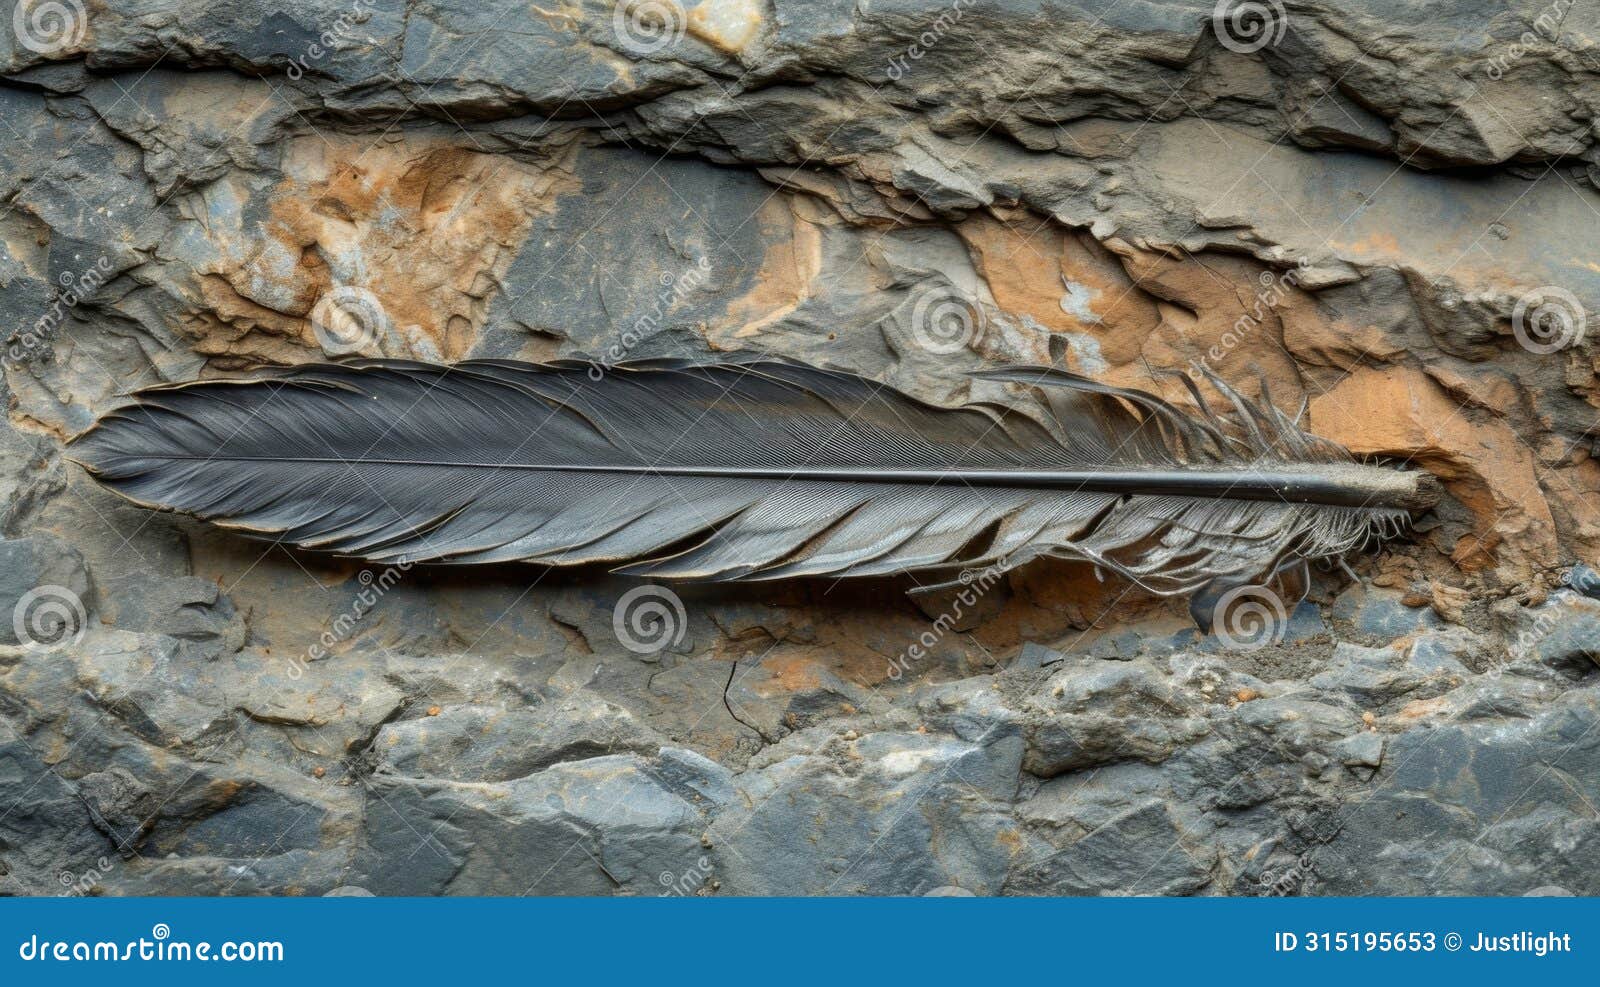 a fossilized feather found in layers of rock indicating the age and evolutionary significance of these feathers in